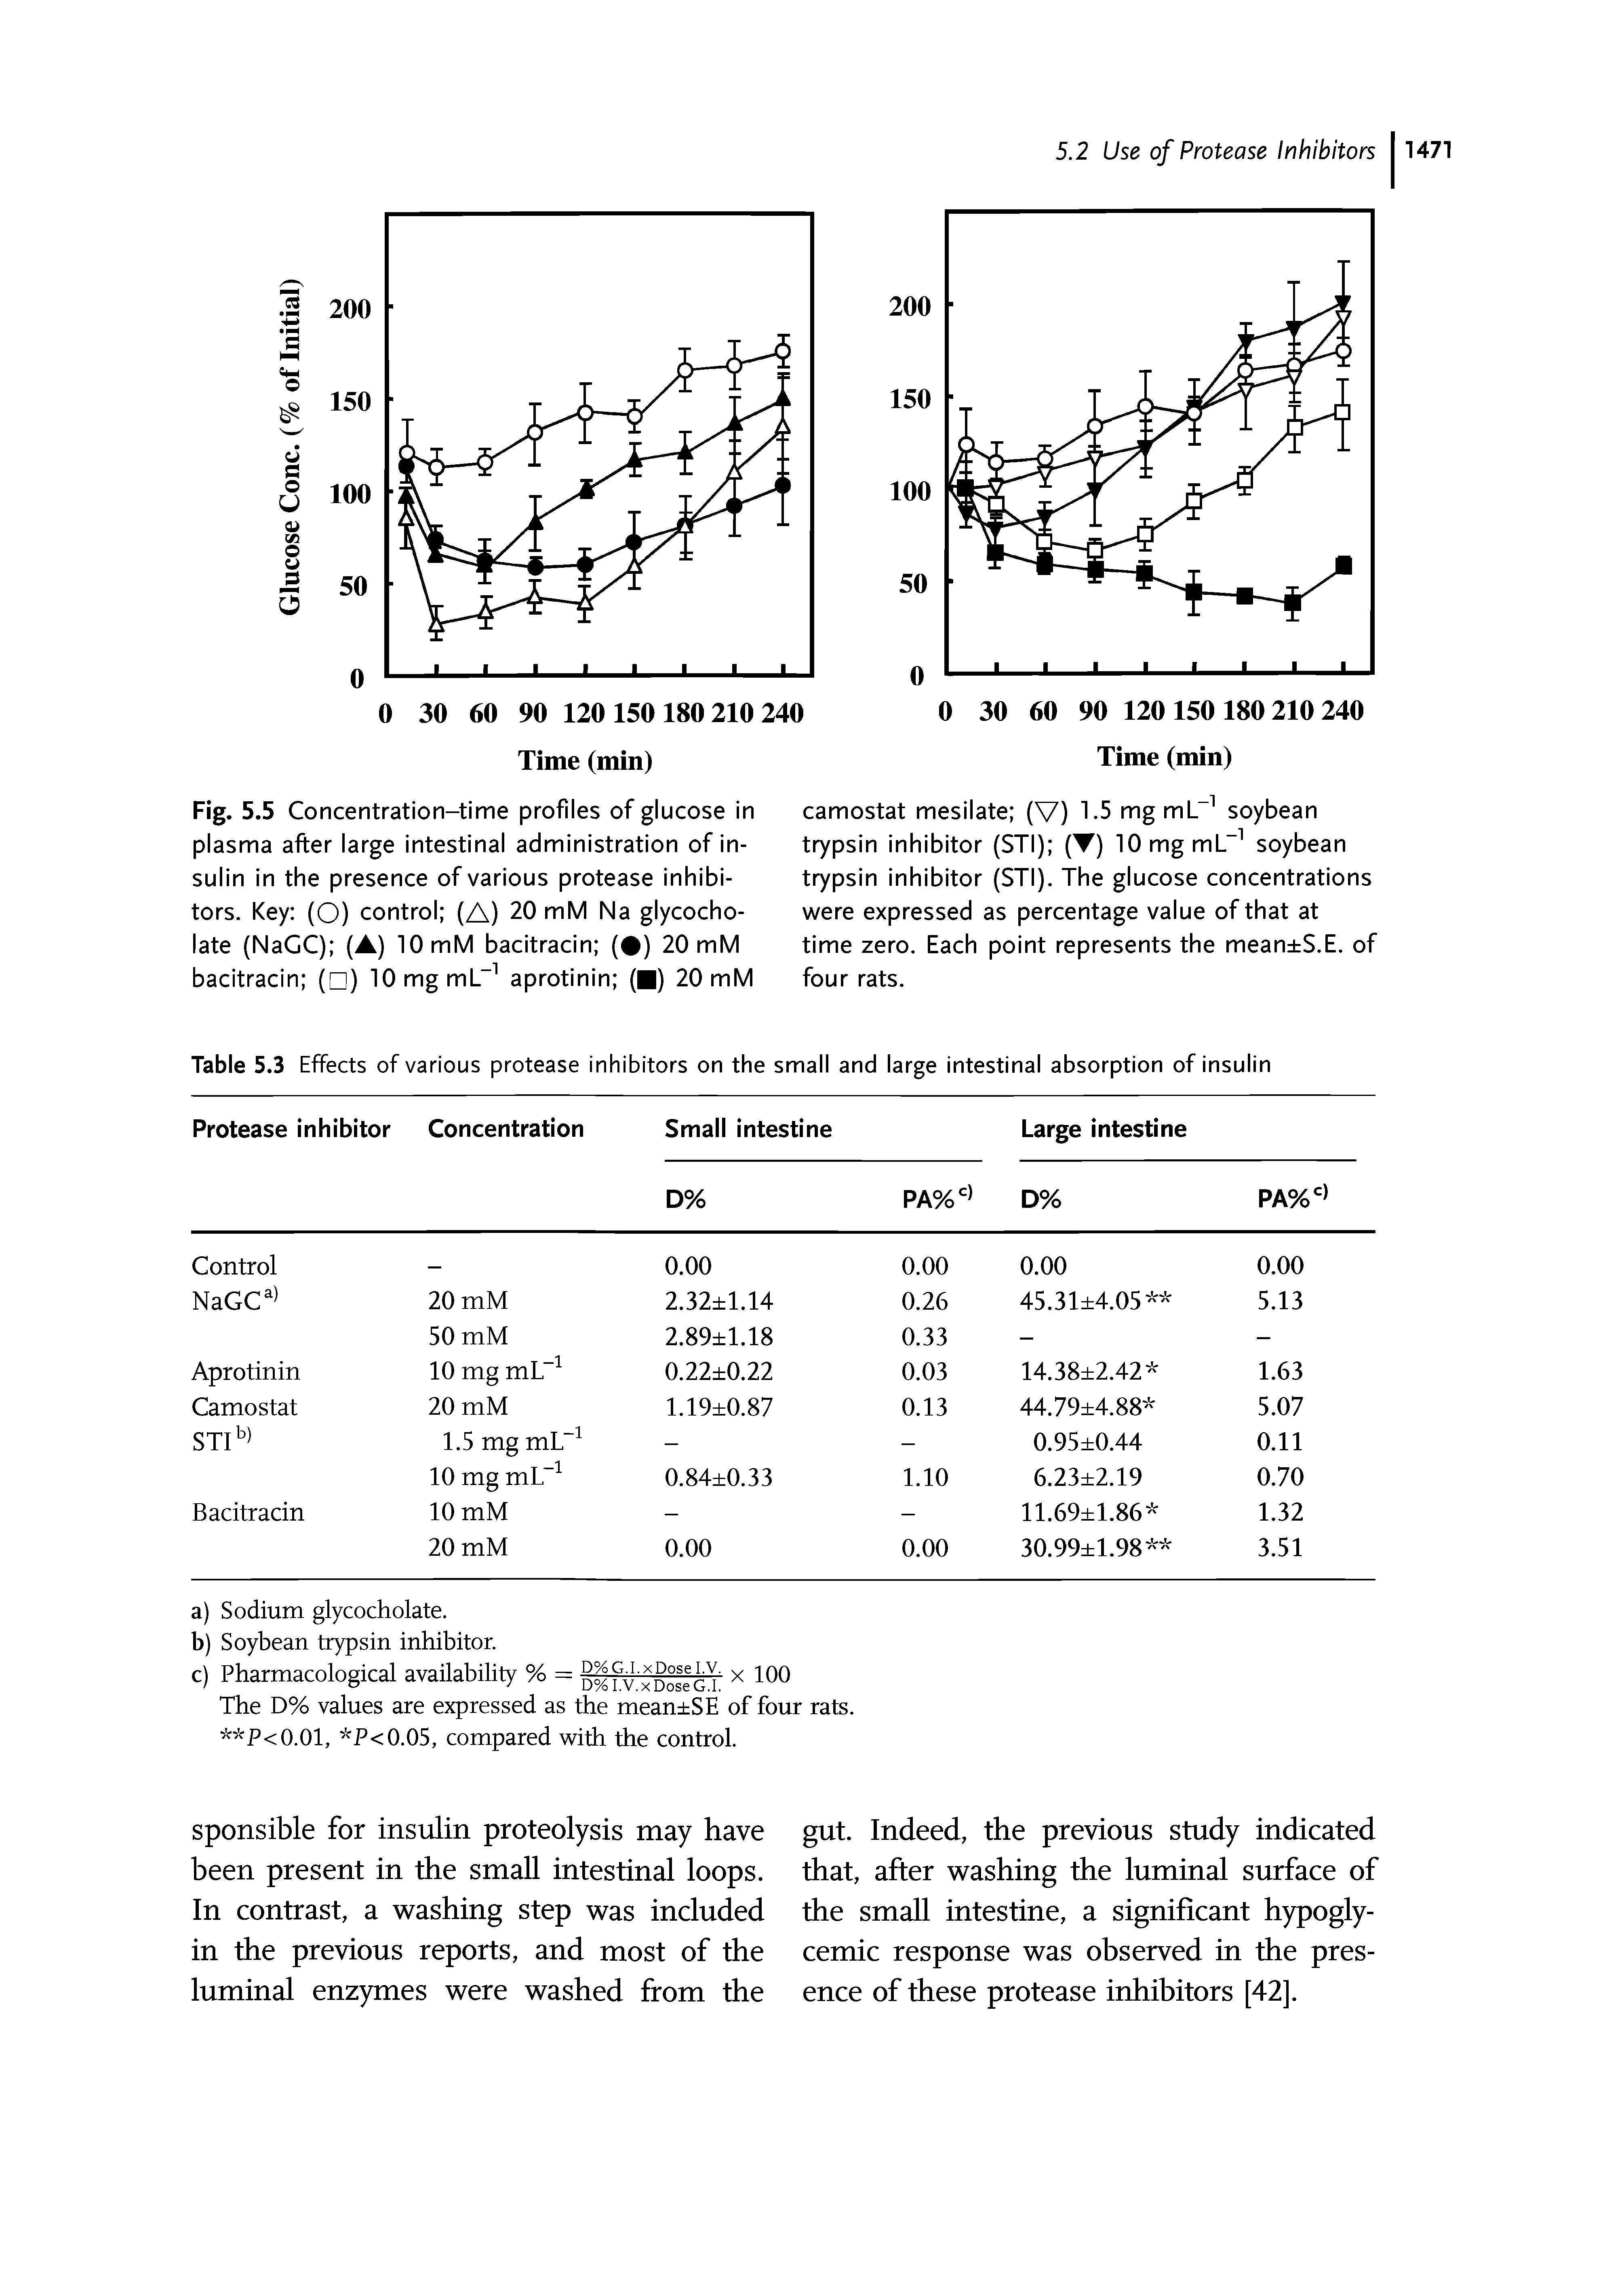 Fig. 5.5 Concentration-time profiles of glucose in plasma after large intestinal administration of insulin in the presence of various protease inhibitors. Key (O) control (A) 20 mM Na glycocho-late (NaCC) (A) 10 mM bacitracin ( ) 20 mM bacitracin ( ) lOmgmL" aprotinin ( ) 20 mM...